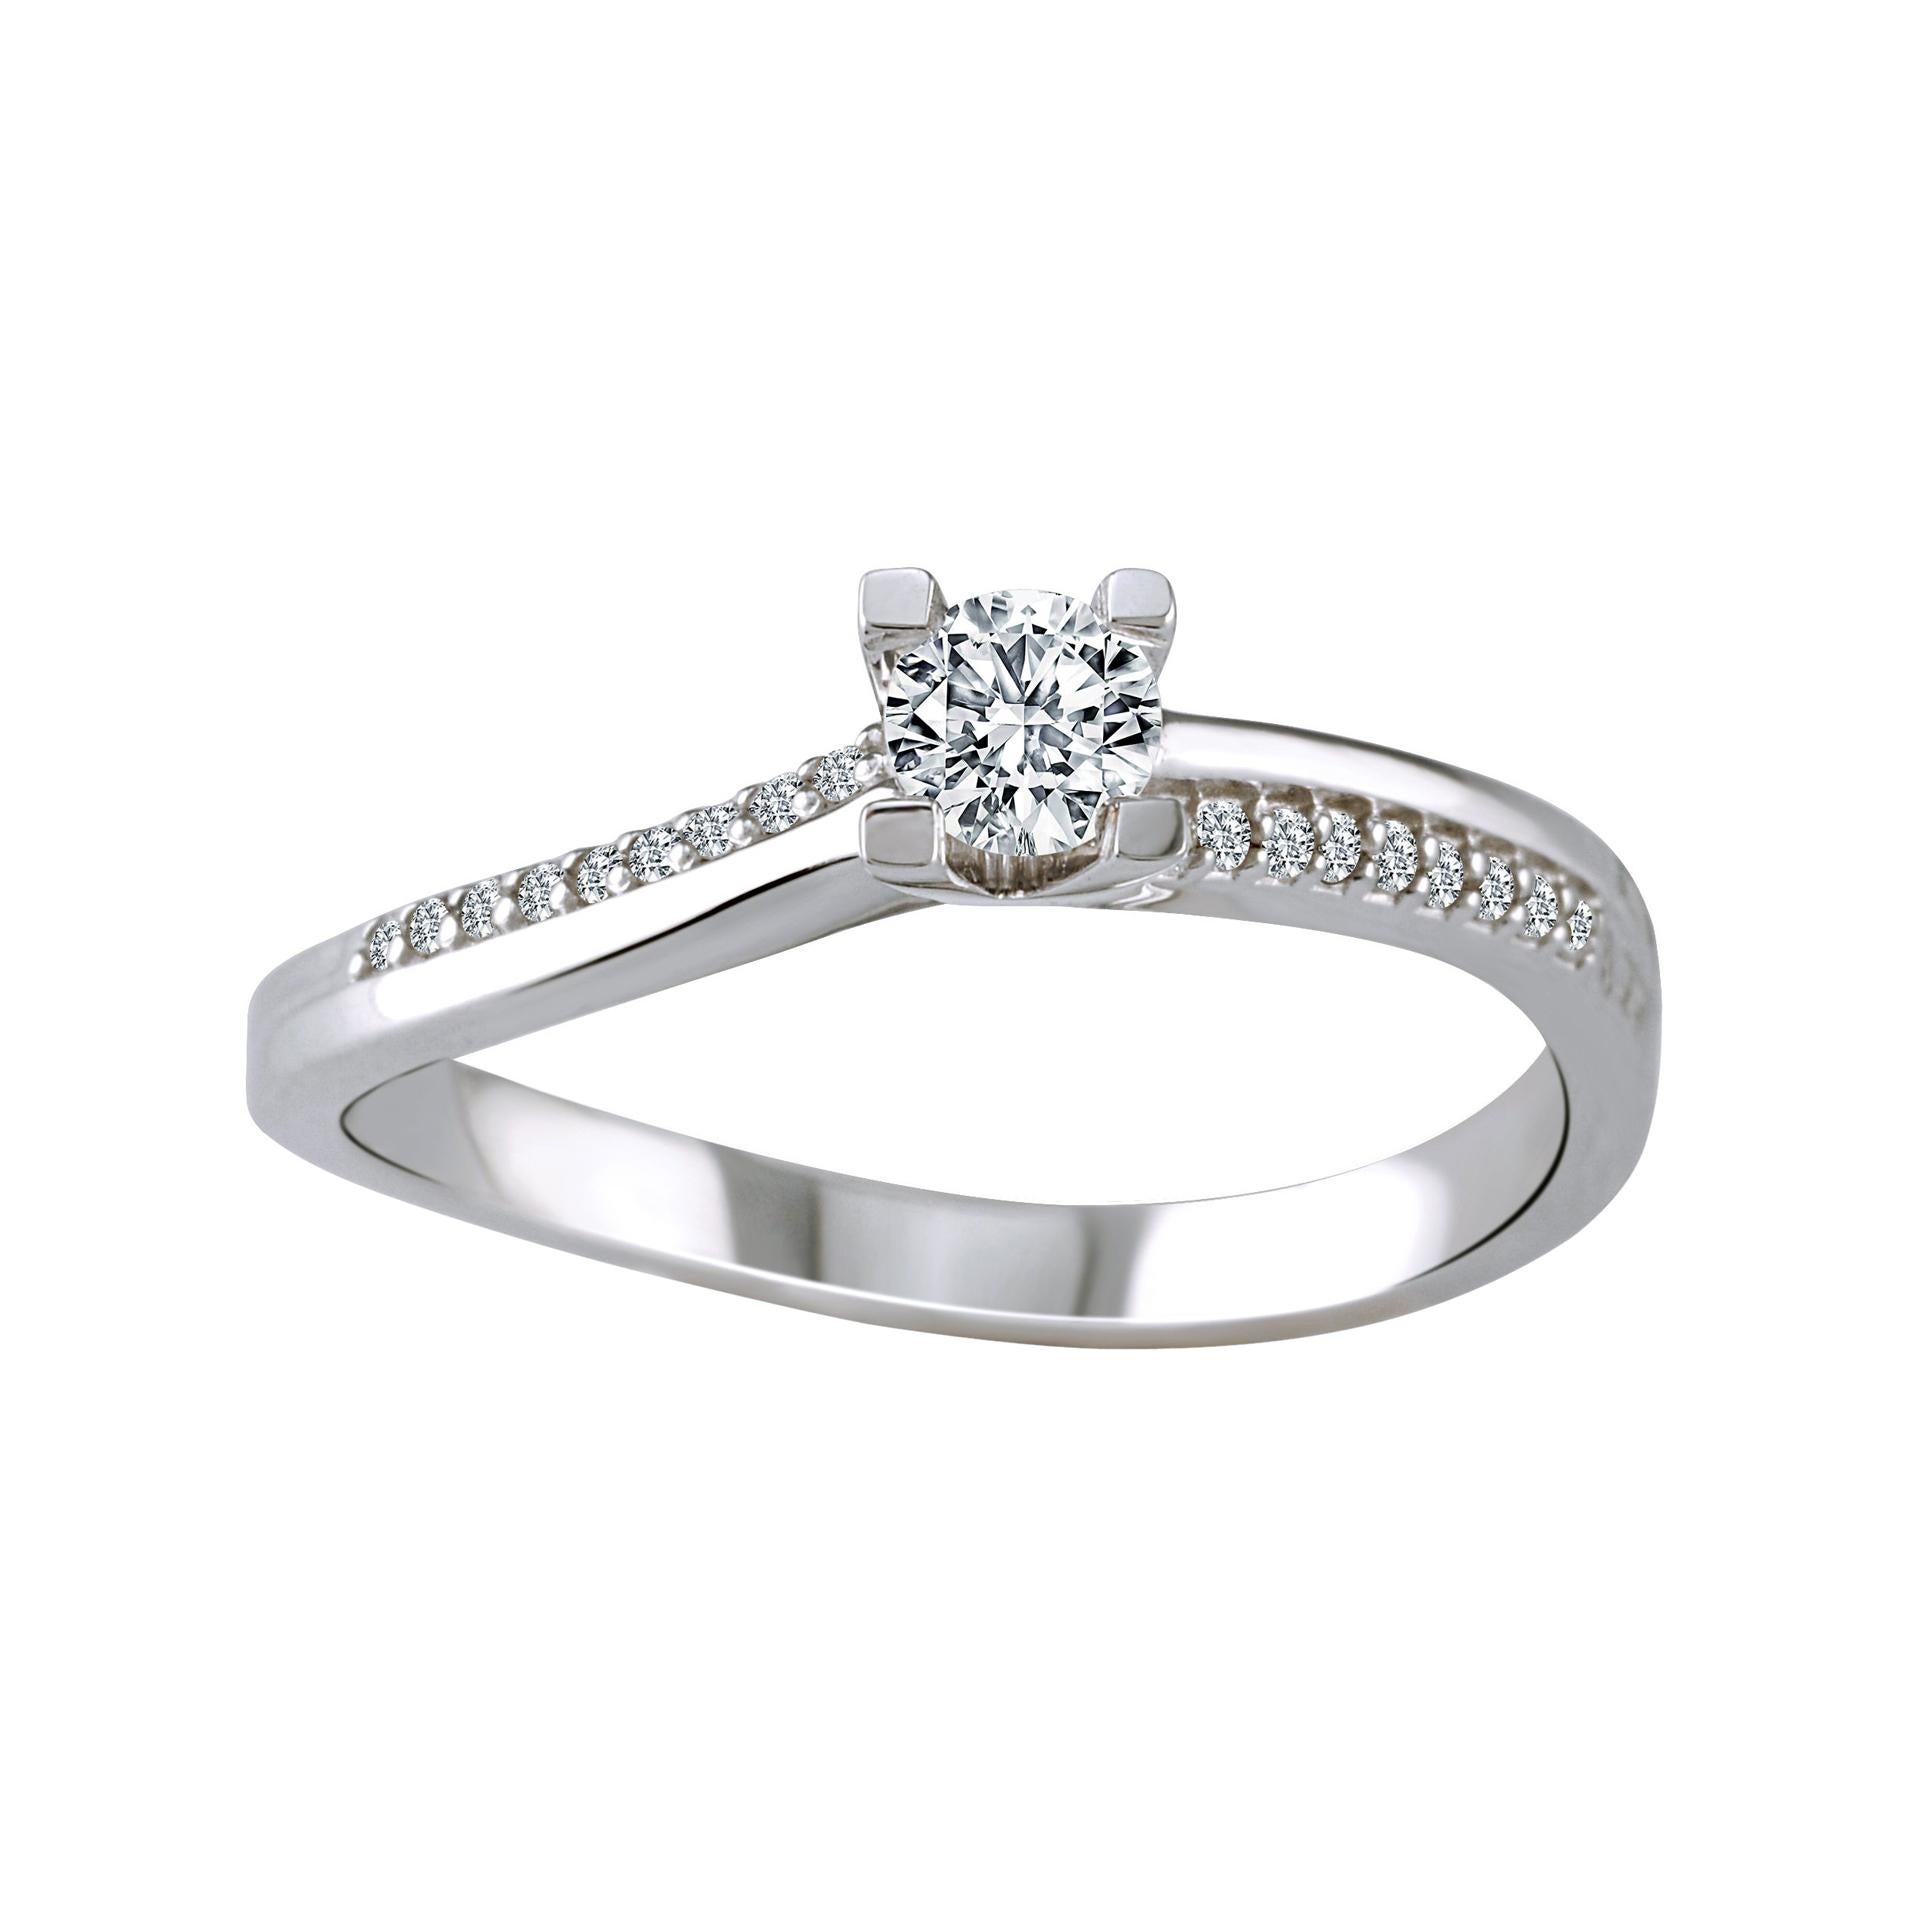 18K White Gold Ring with Round-Cut Diamonds